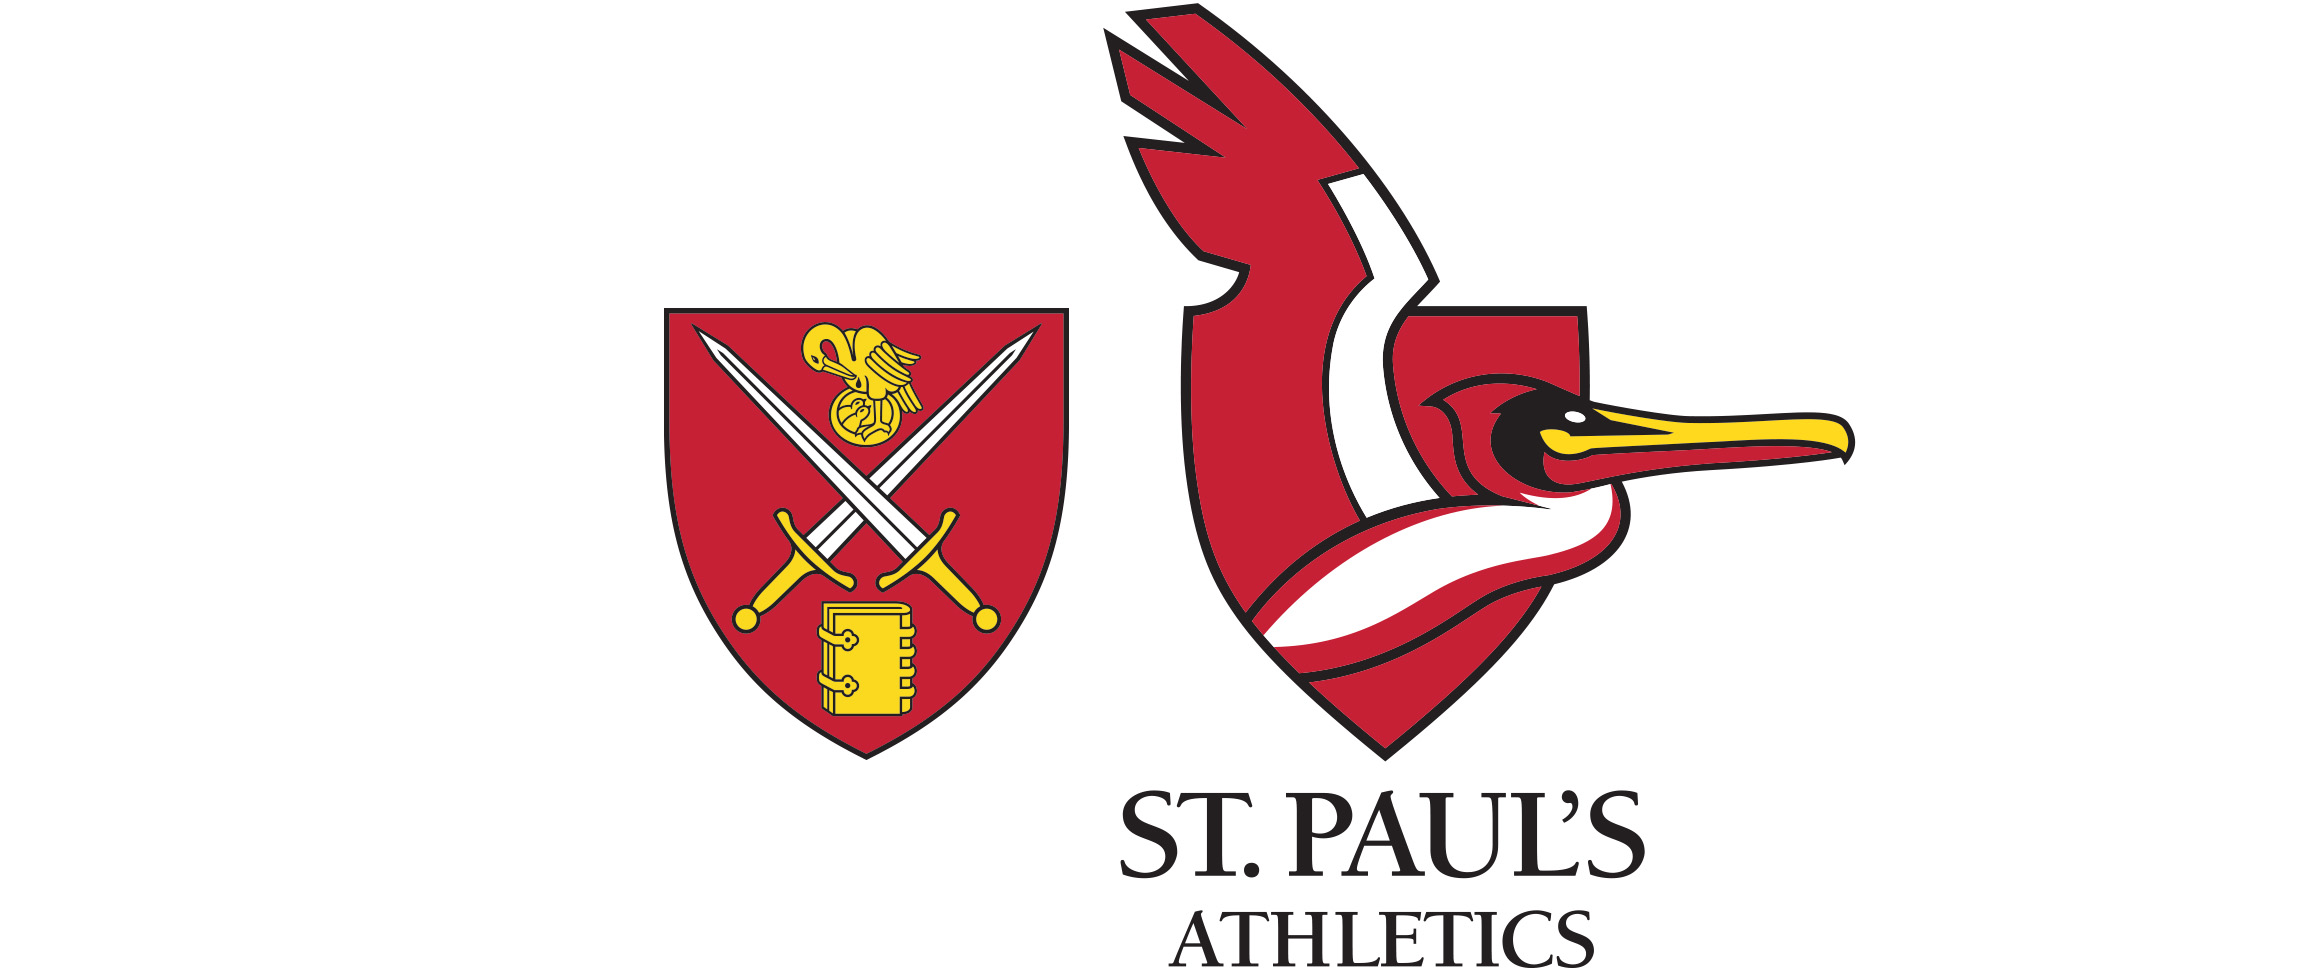 St. Paul's School official shield and the St. Paul's Athletics shield and peilcan mascot identity